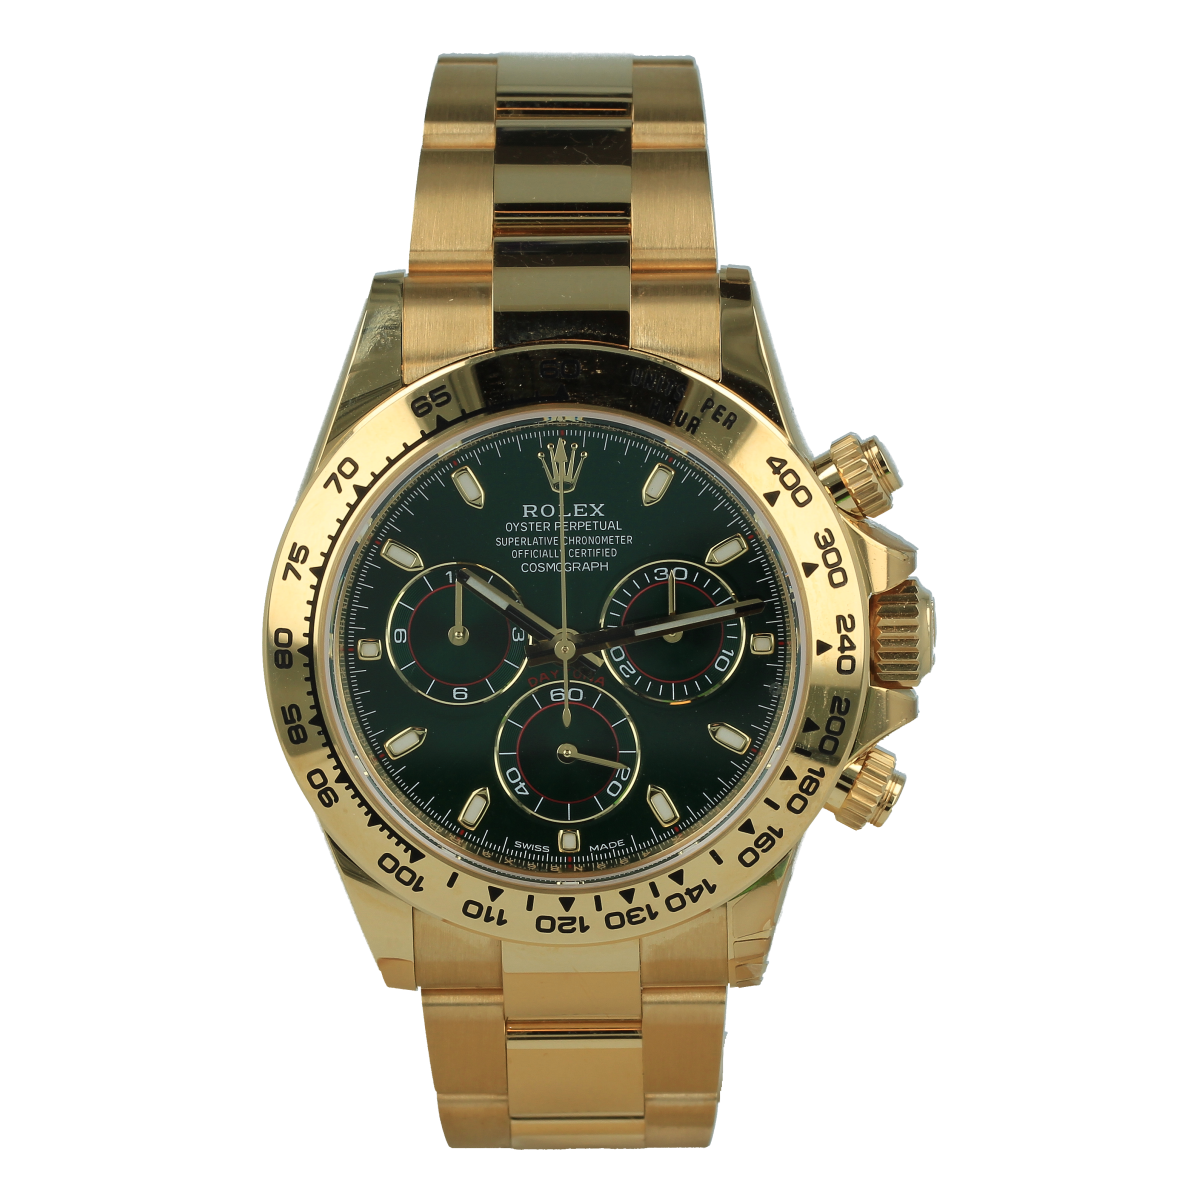 Rolex Cosmograph Daytona 116508 Yellow Gold green dial *New* | Buy pre-owned Rolex watch